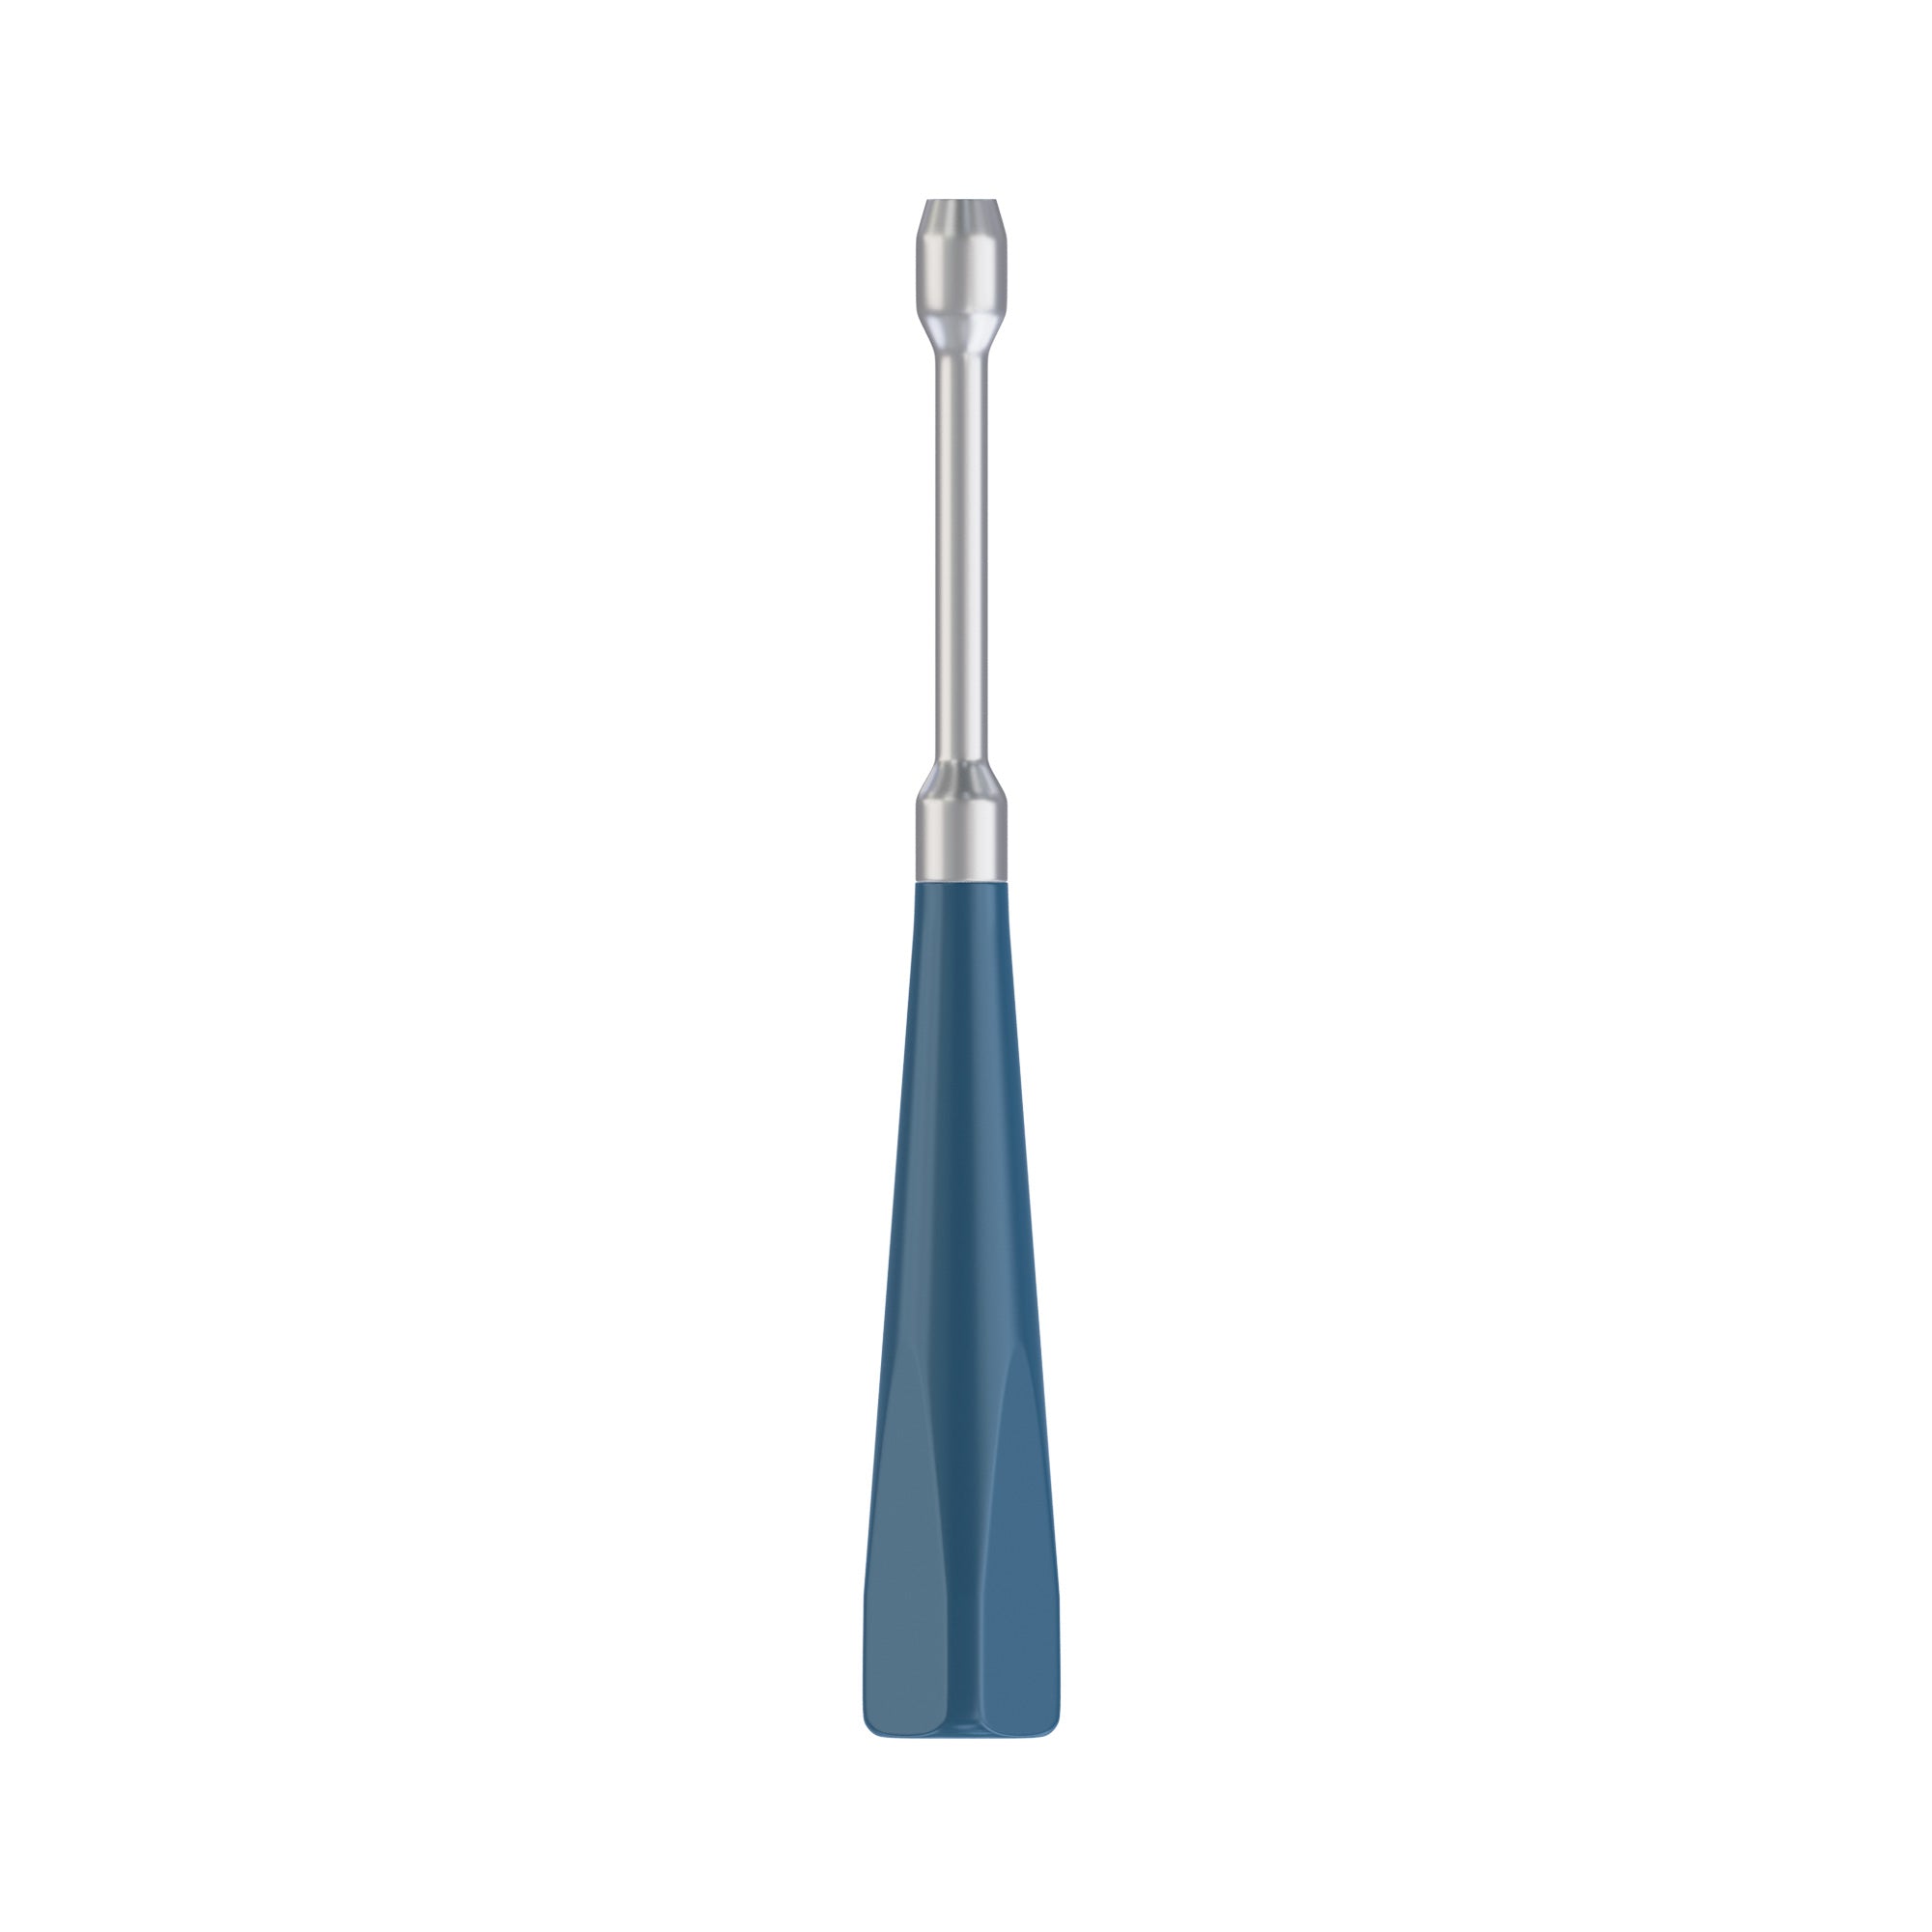 DSI Surgical Handle Adapter Driver - Hexagonal Head Connection Ø6.35mm